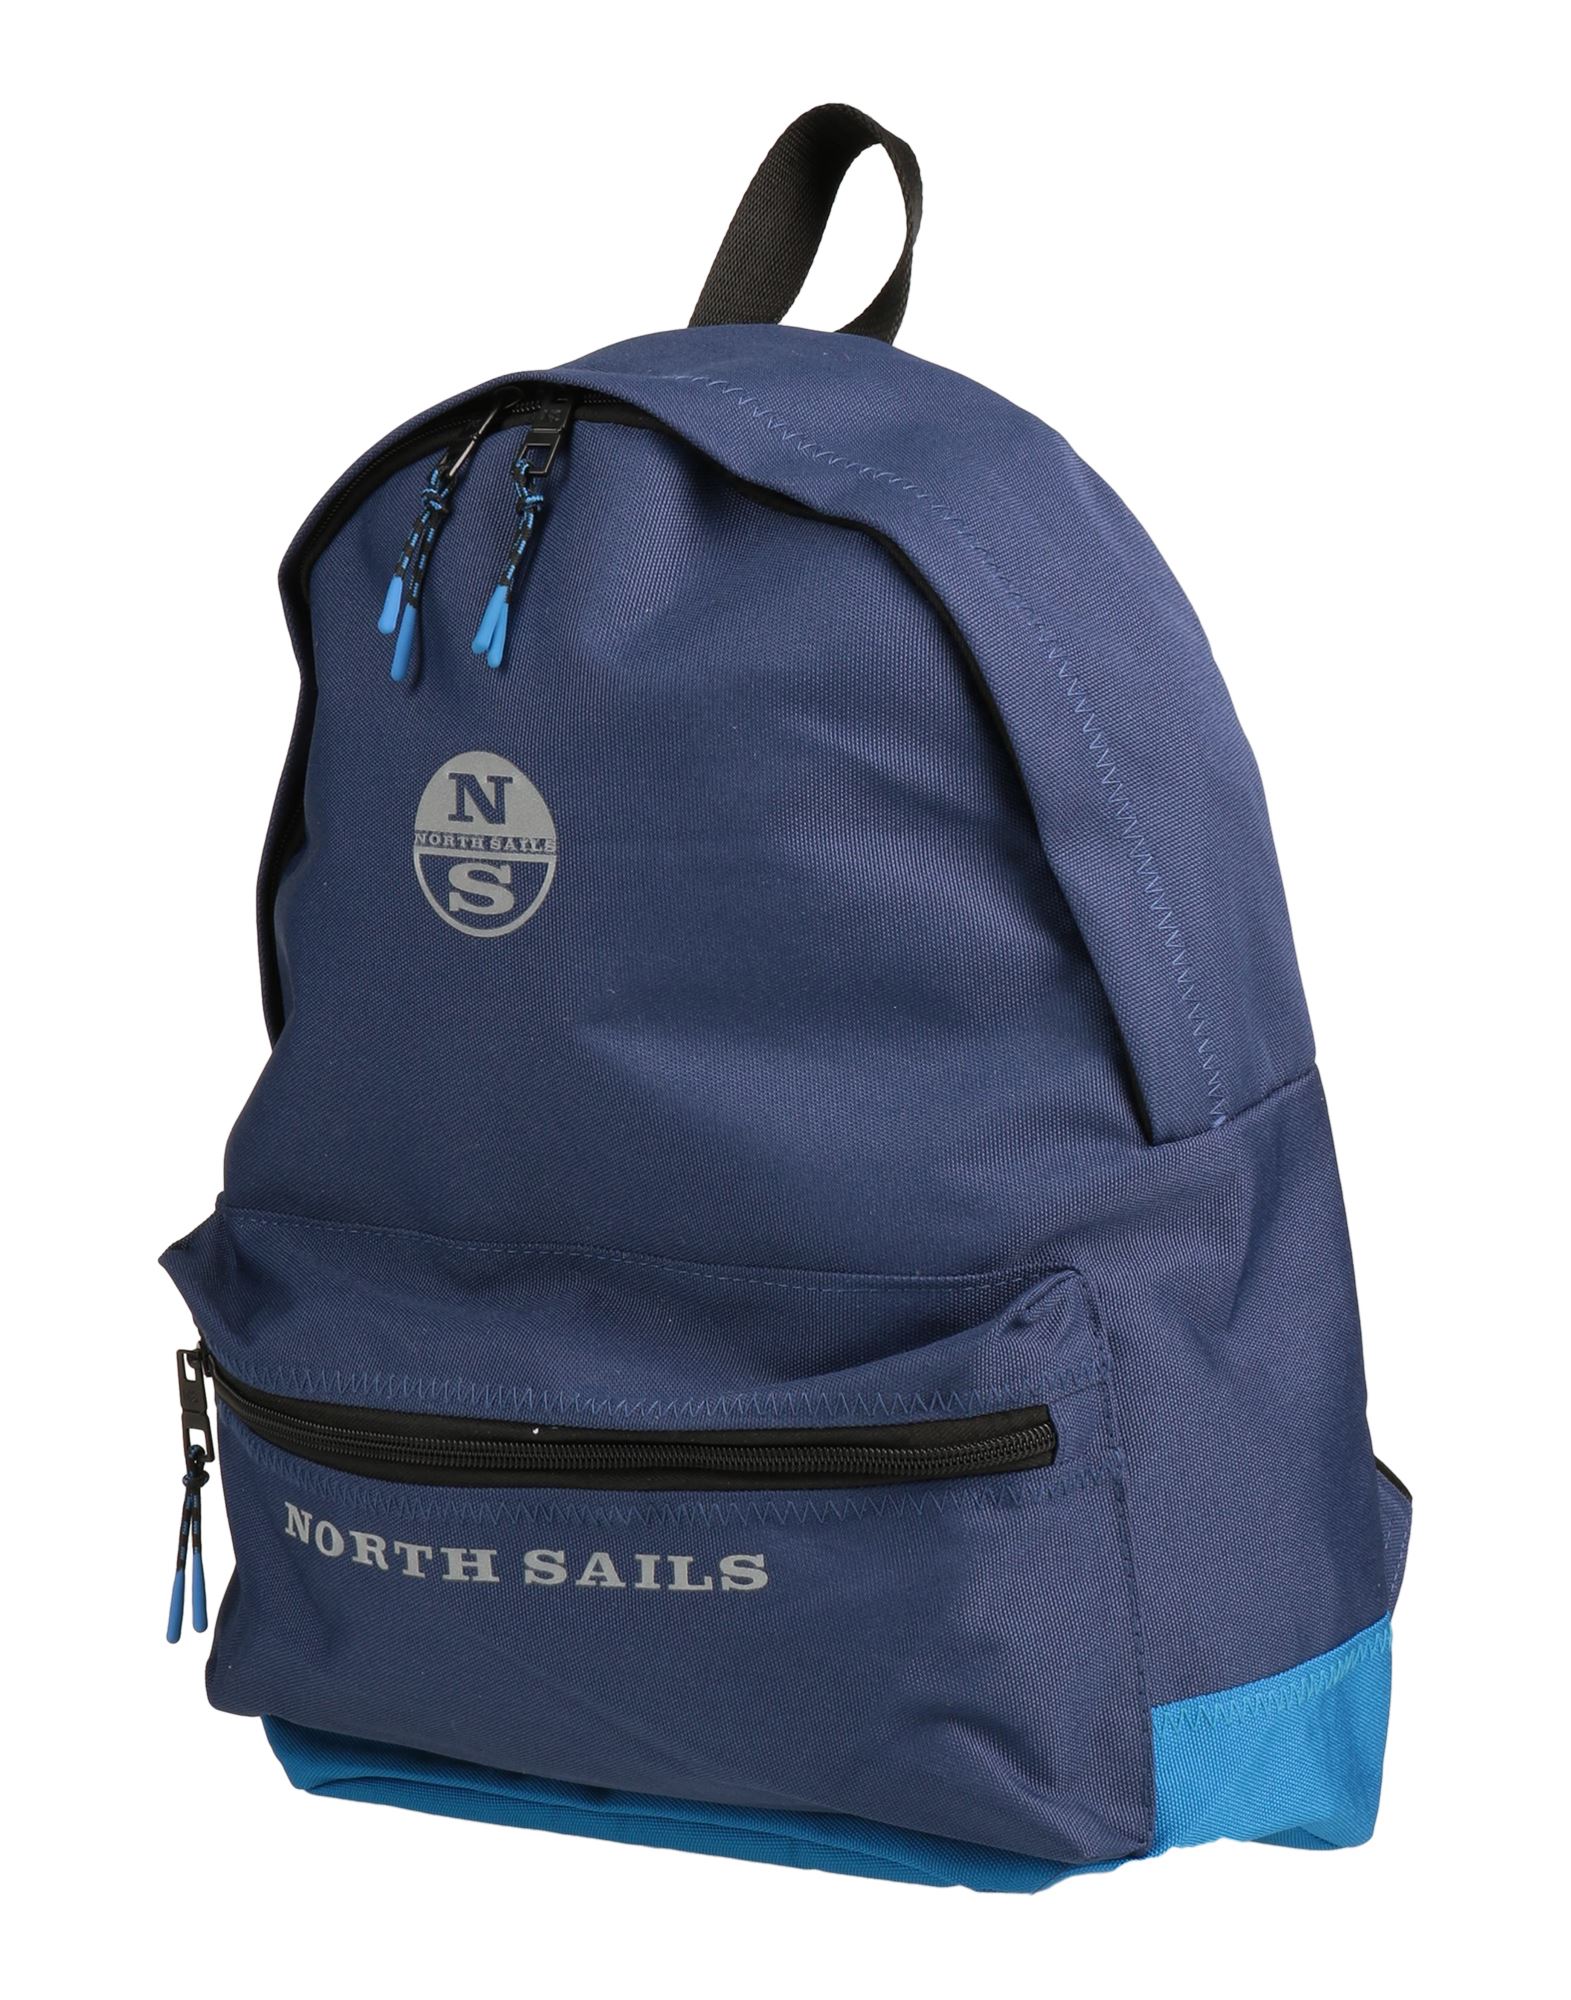 North Sails Backpacks In Navy Blue